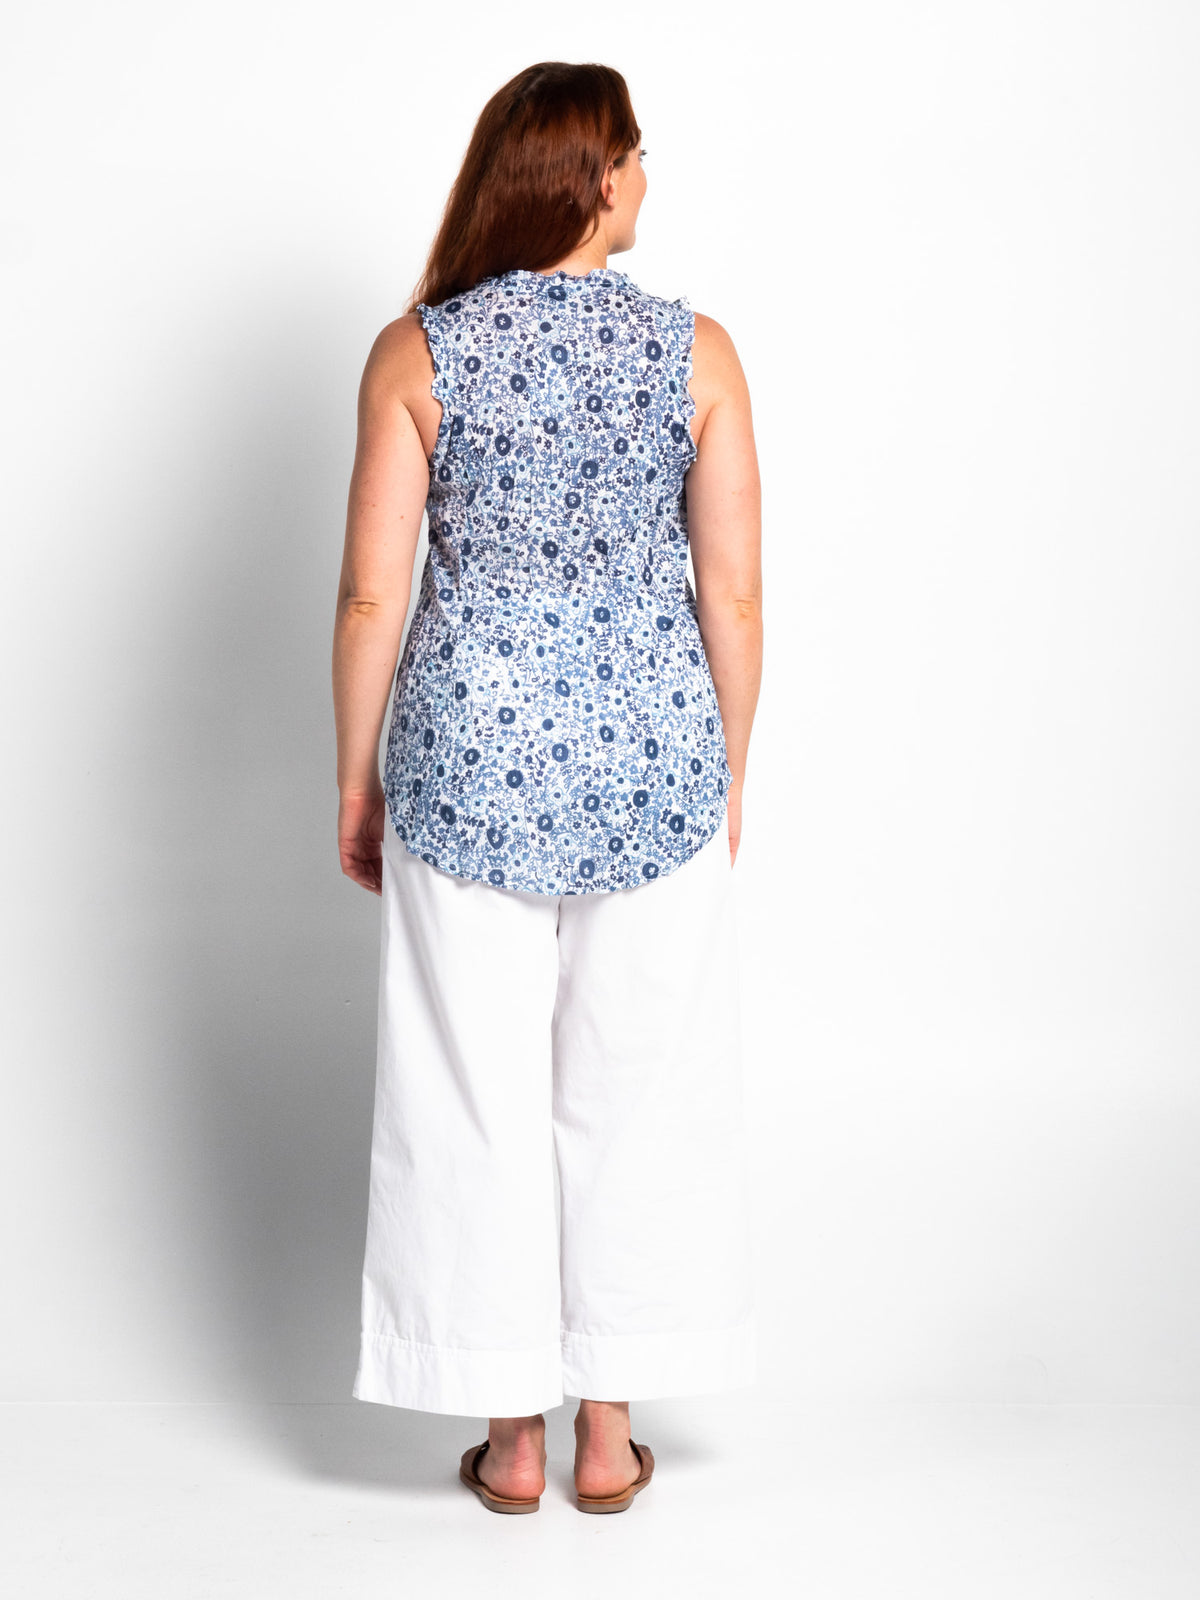 Chilli Top in Two Blues Floral